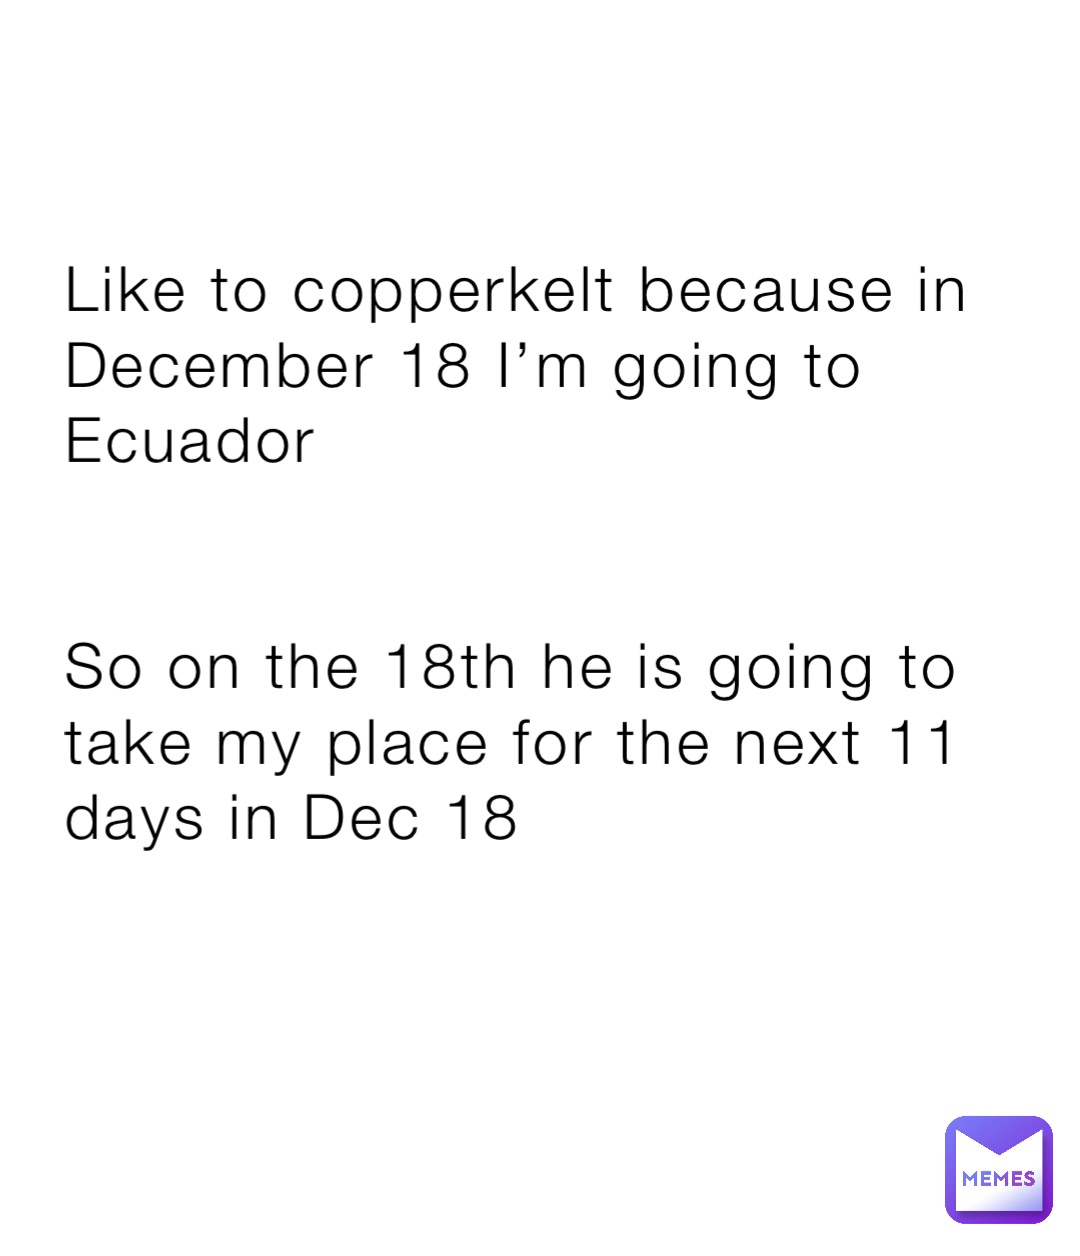 Like to copperkelt because in December 18 I’m going to Ecuador 


So on the 18th he is going to take my place for the next 11 days in Dec 18